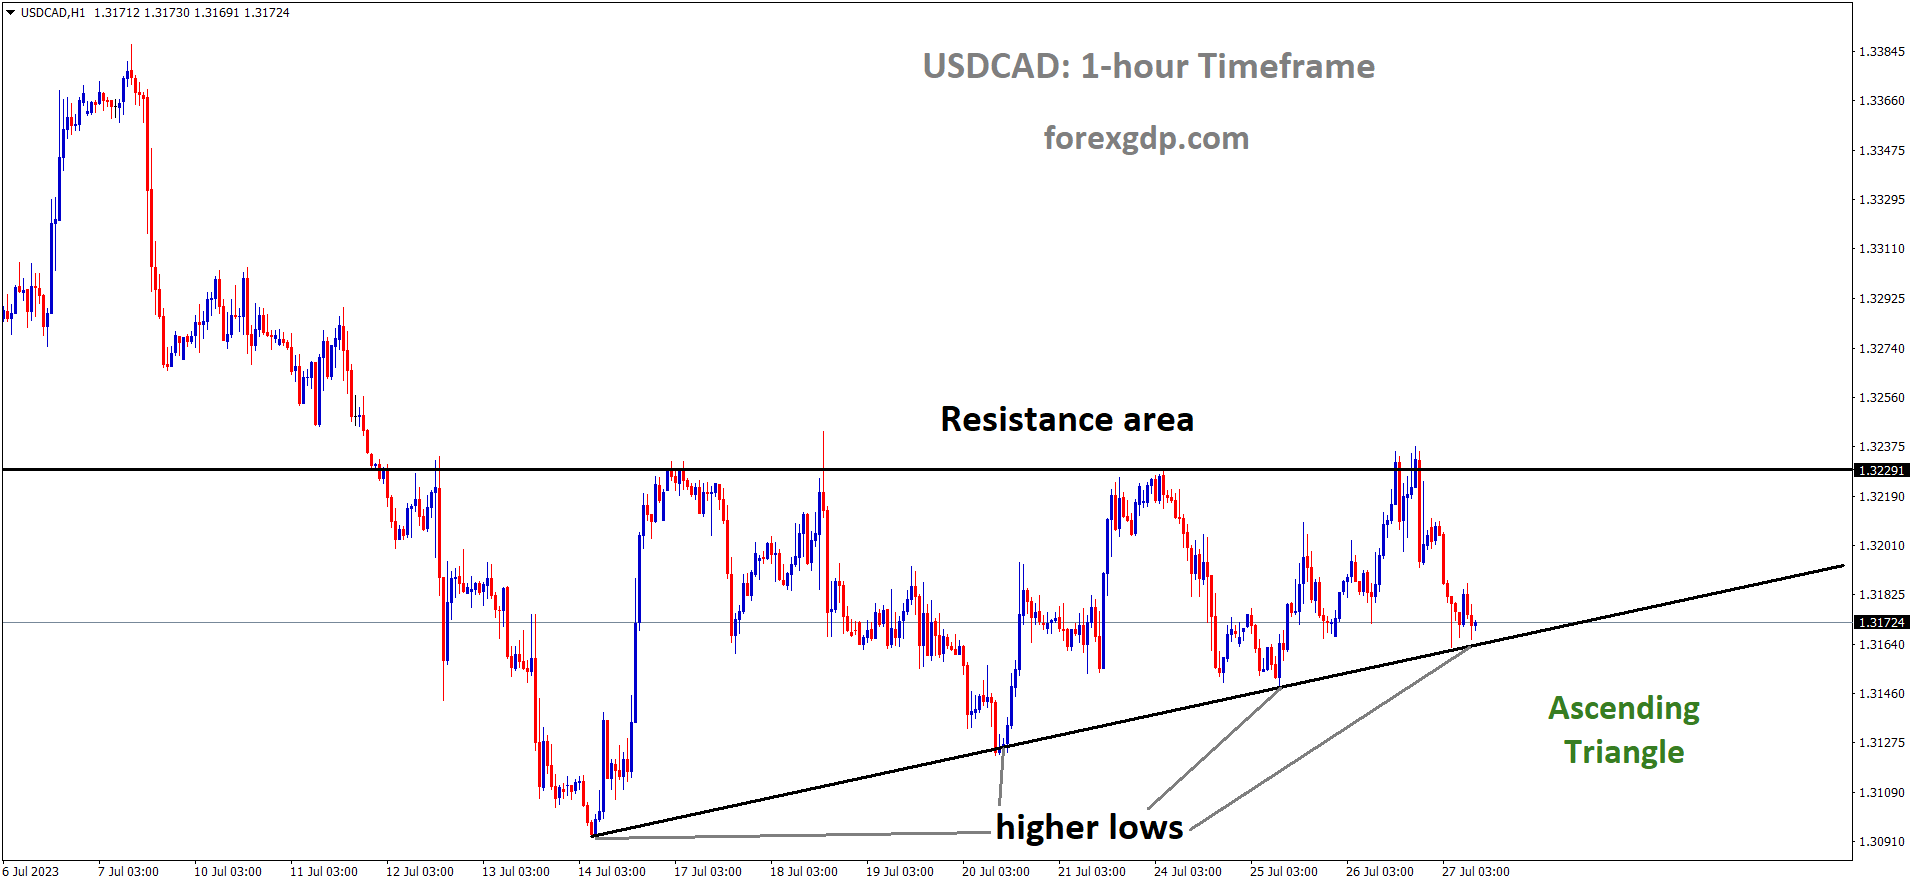 USDCAD is moving in an Ascending triangle pattern and the market has reached the higher low area of the pattern